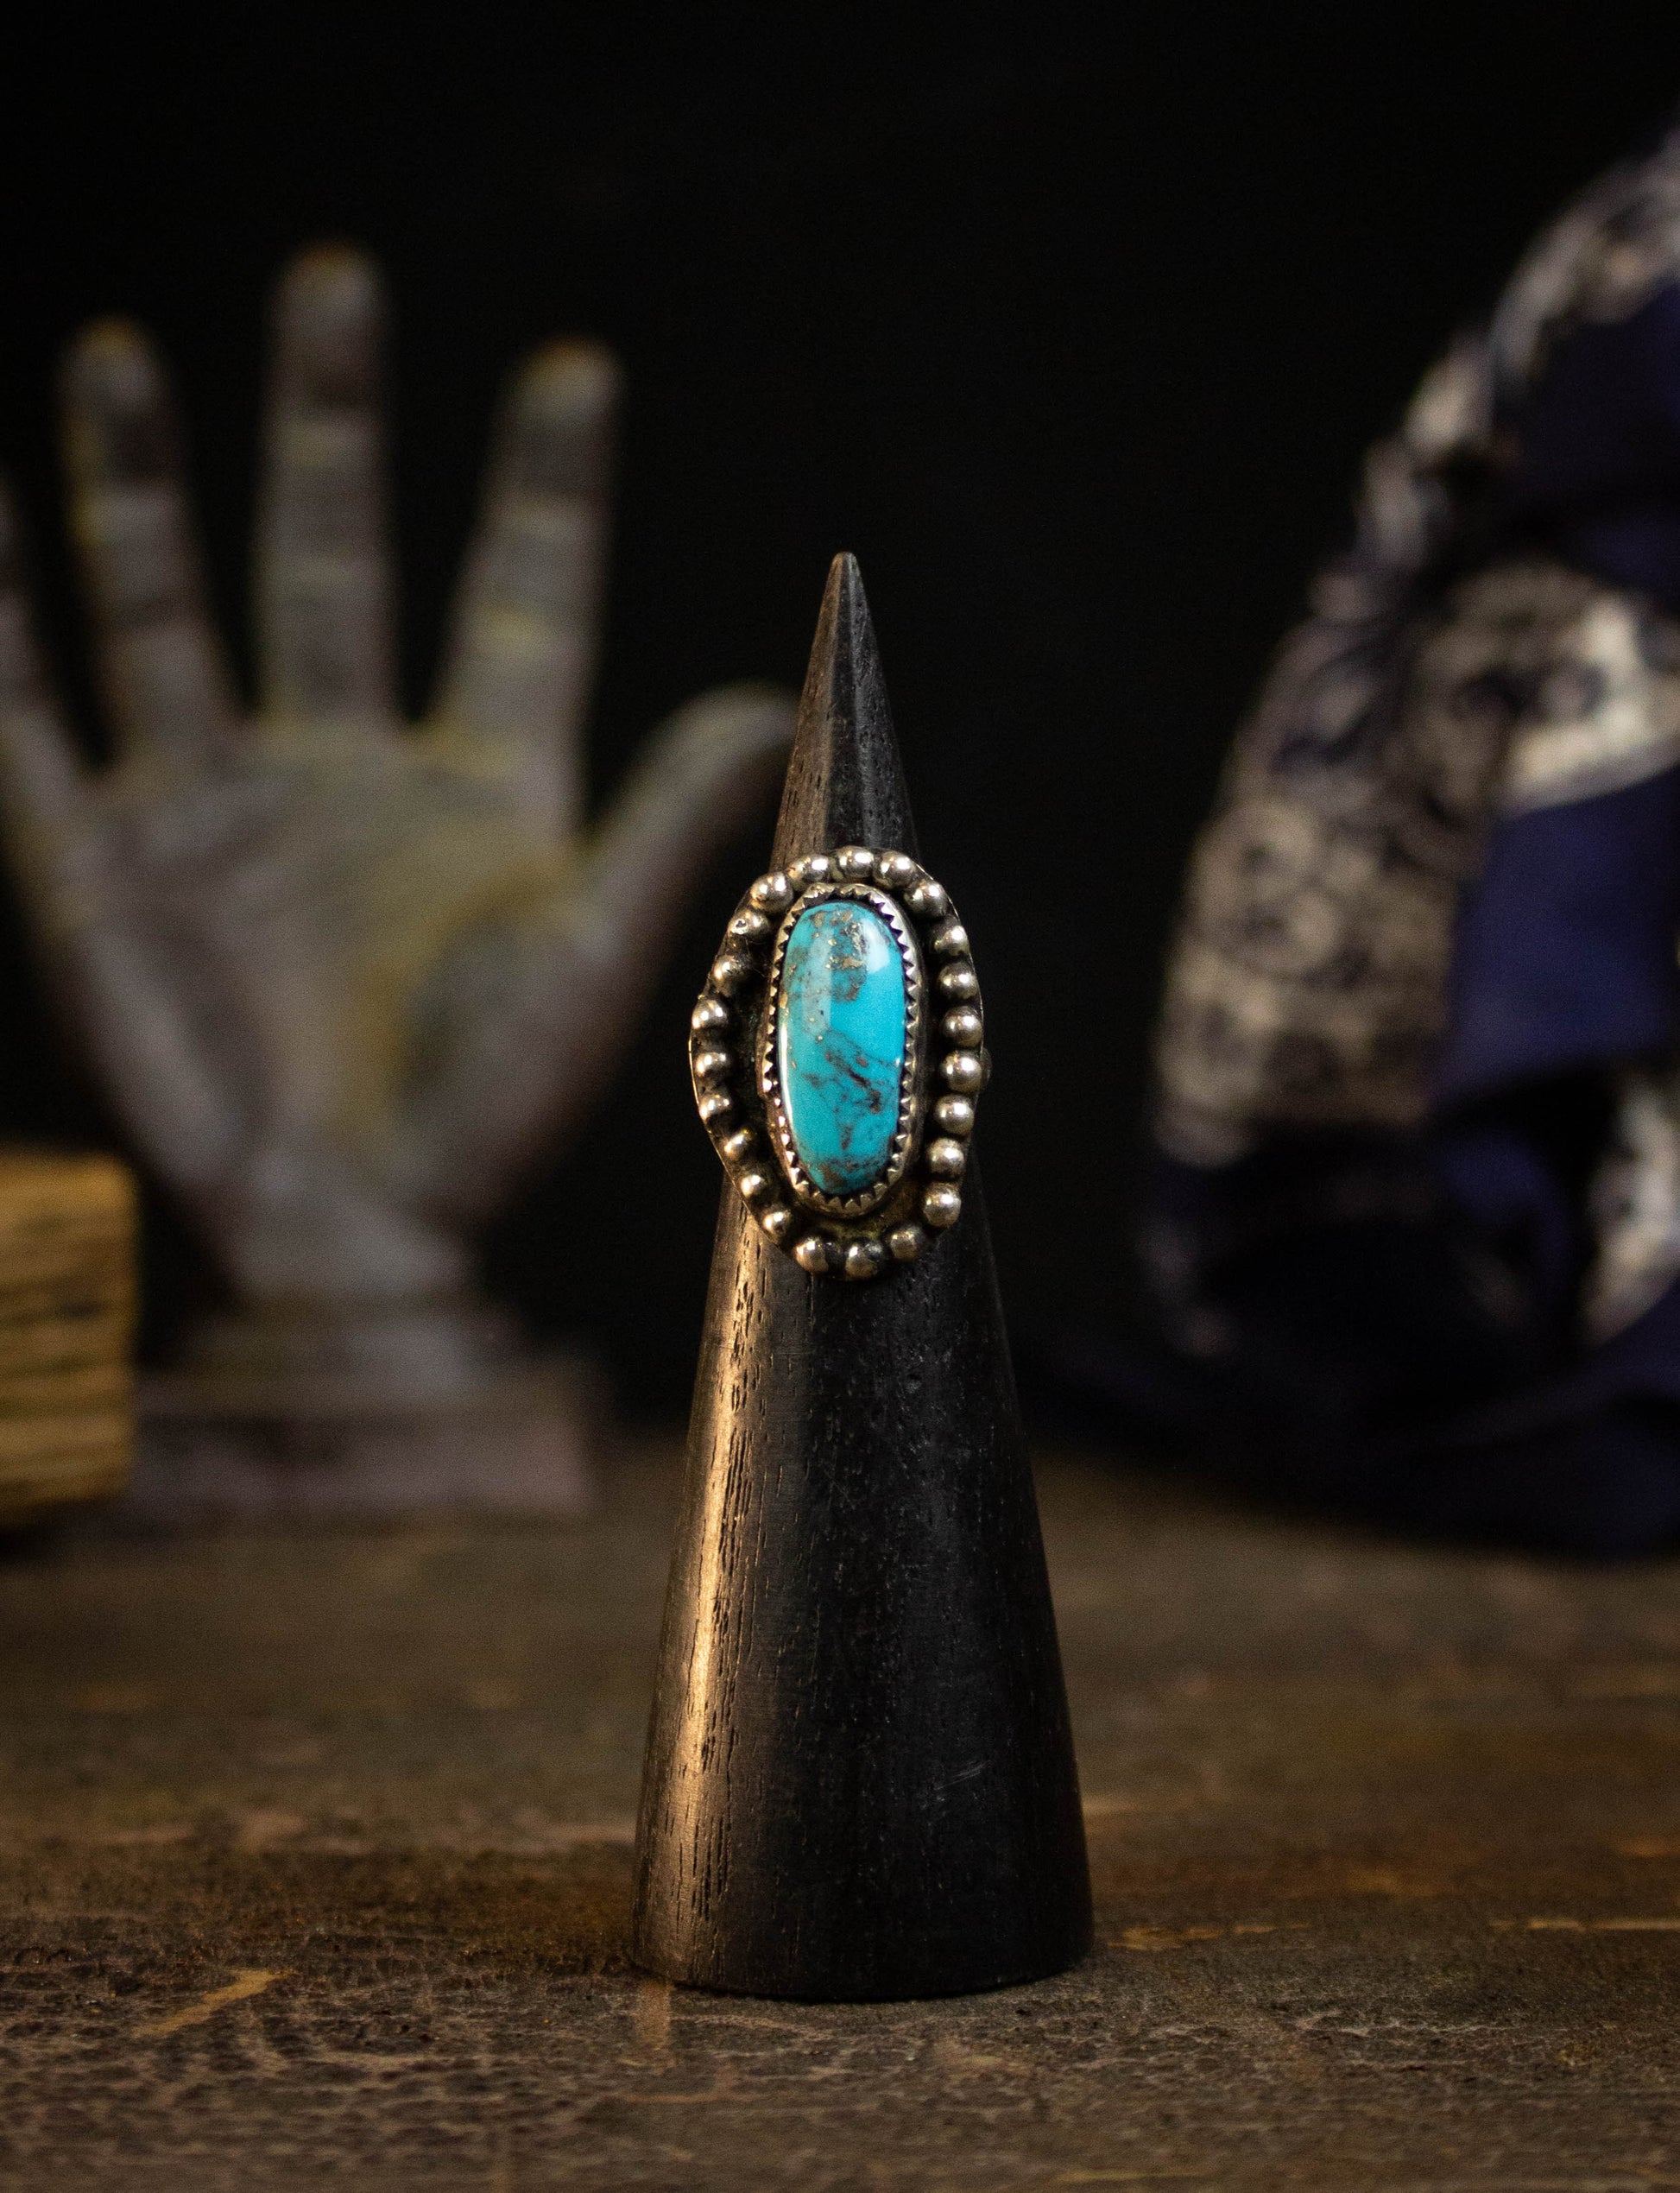 Vintage Sterling Silver Turquoise Ring with Beaded Bezel Size 5 3/4